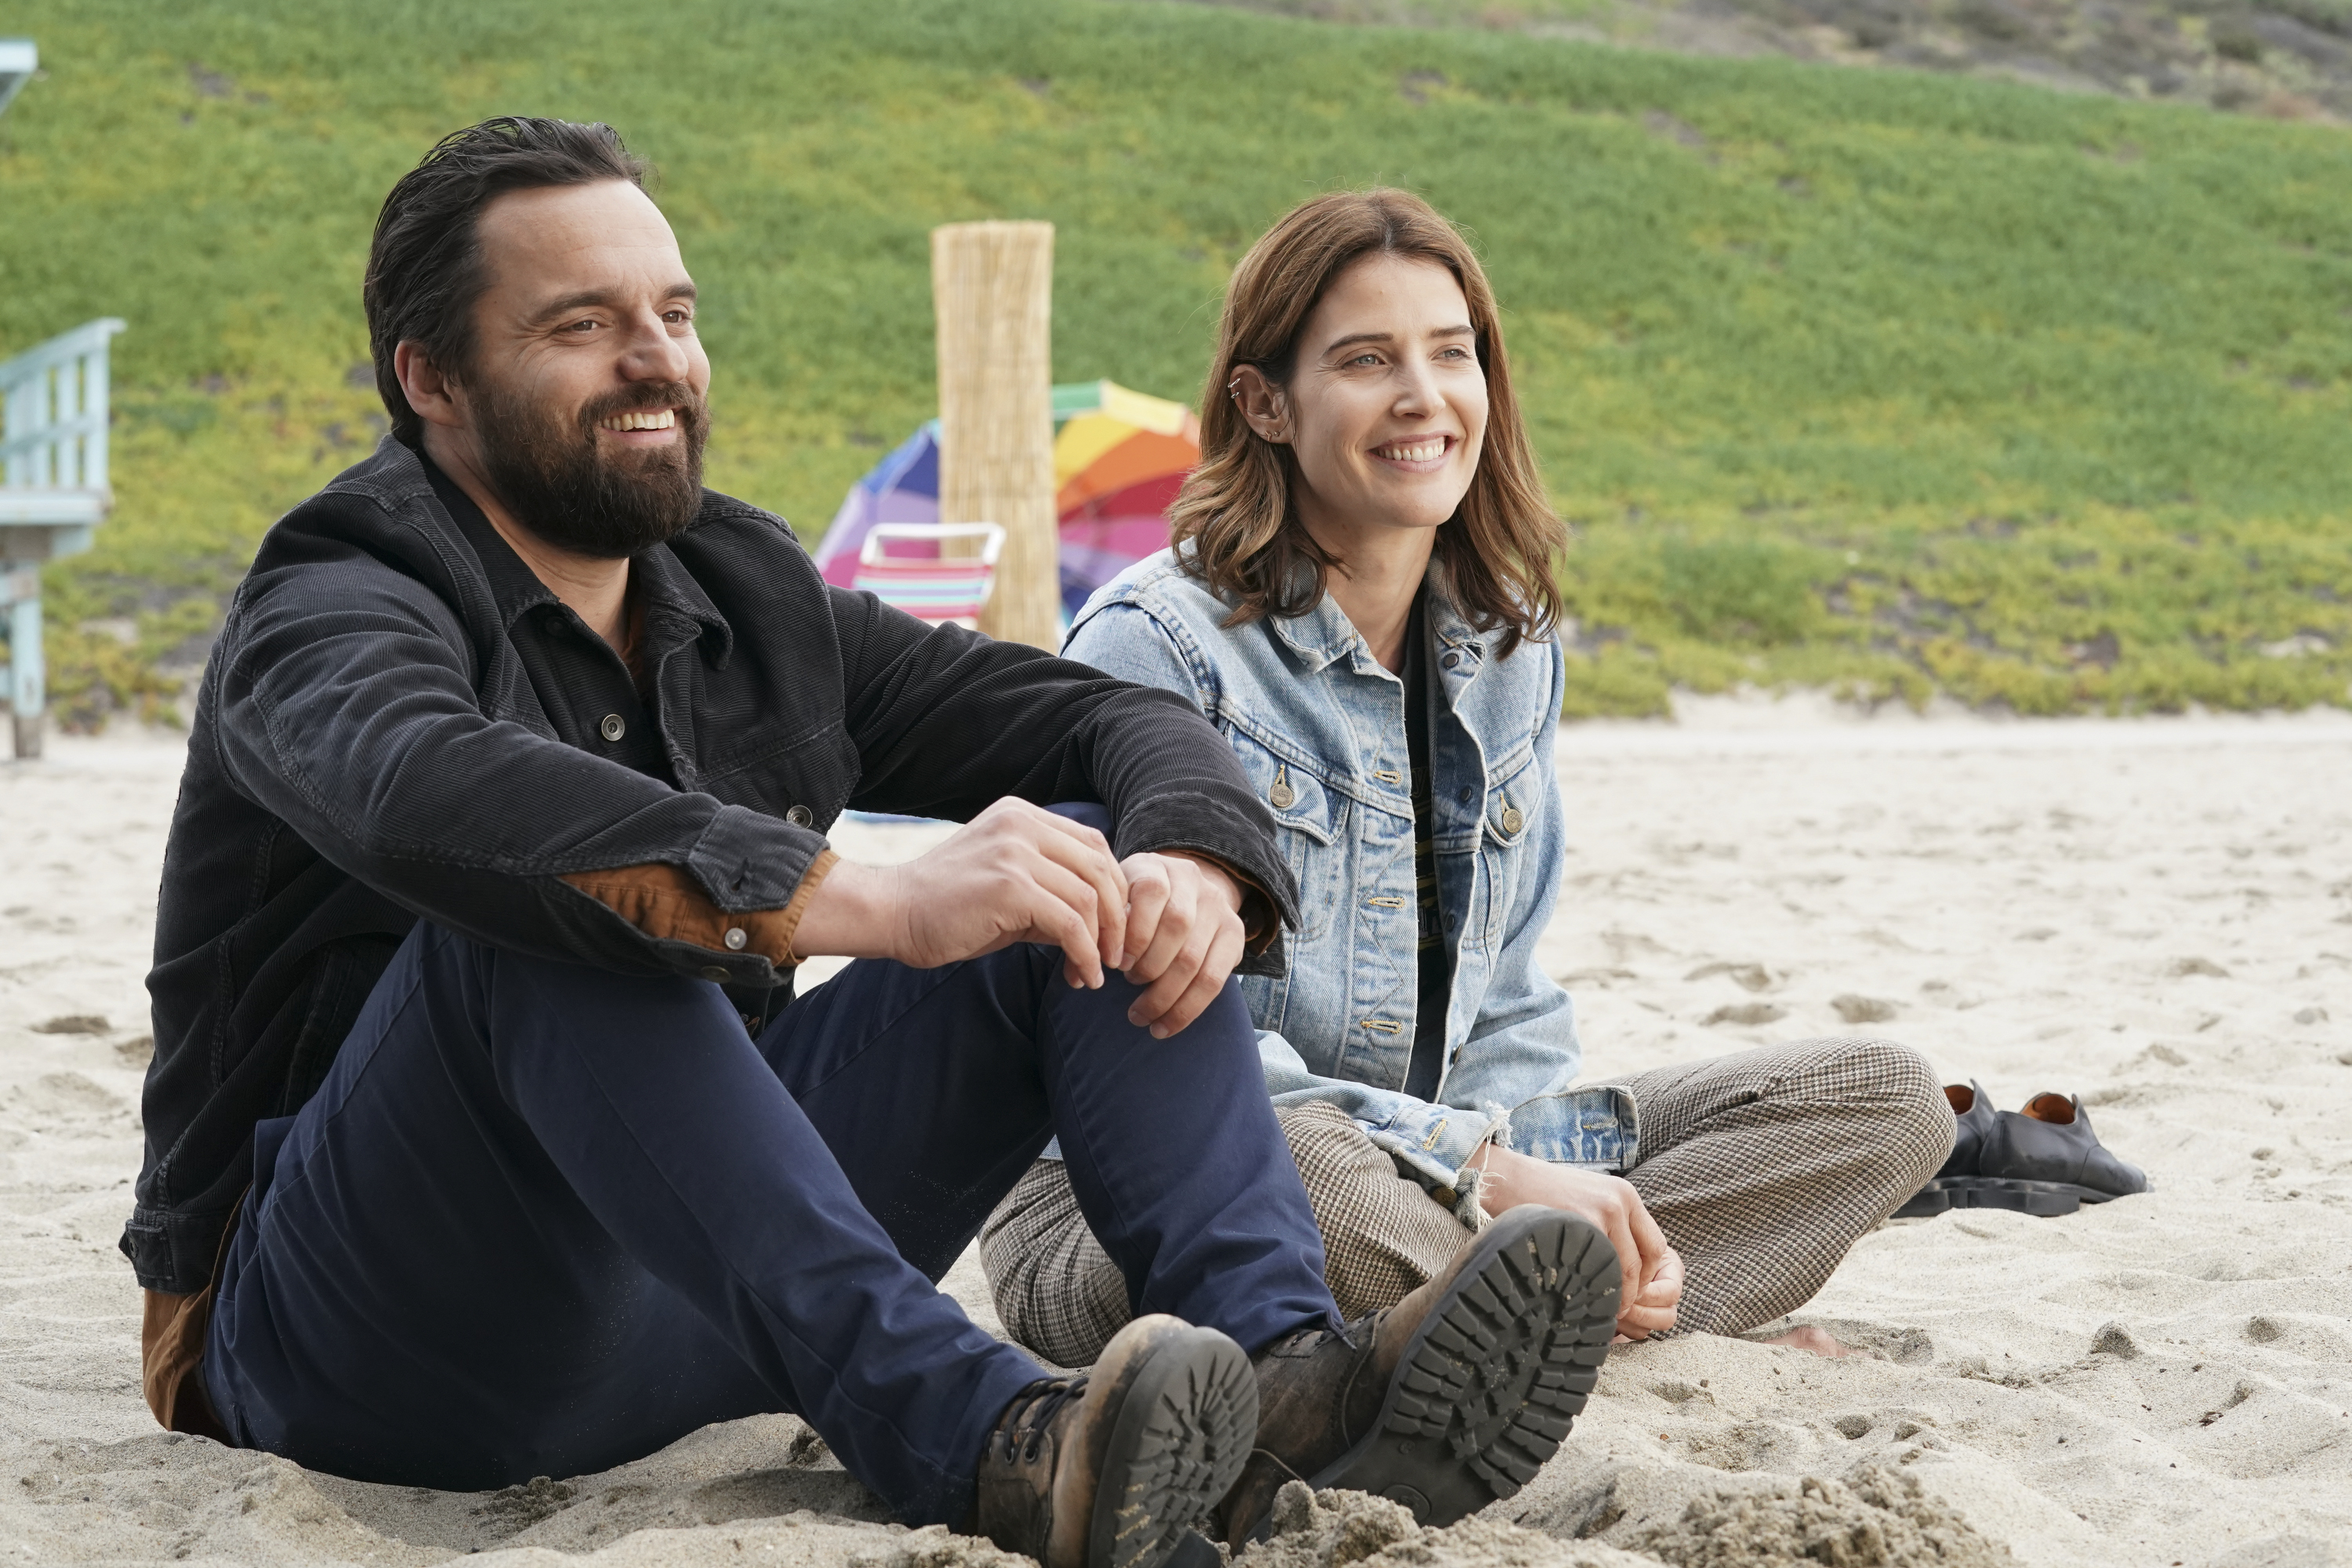 Two people sitting on a beach in a scene from &quot;Stumptown&quot;